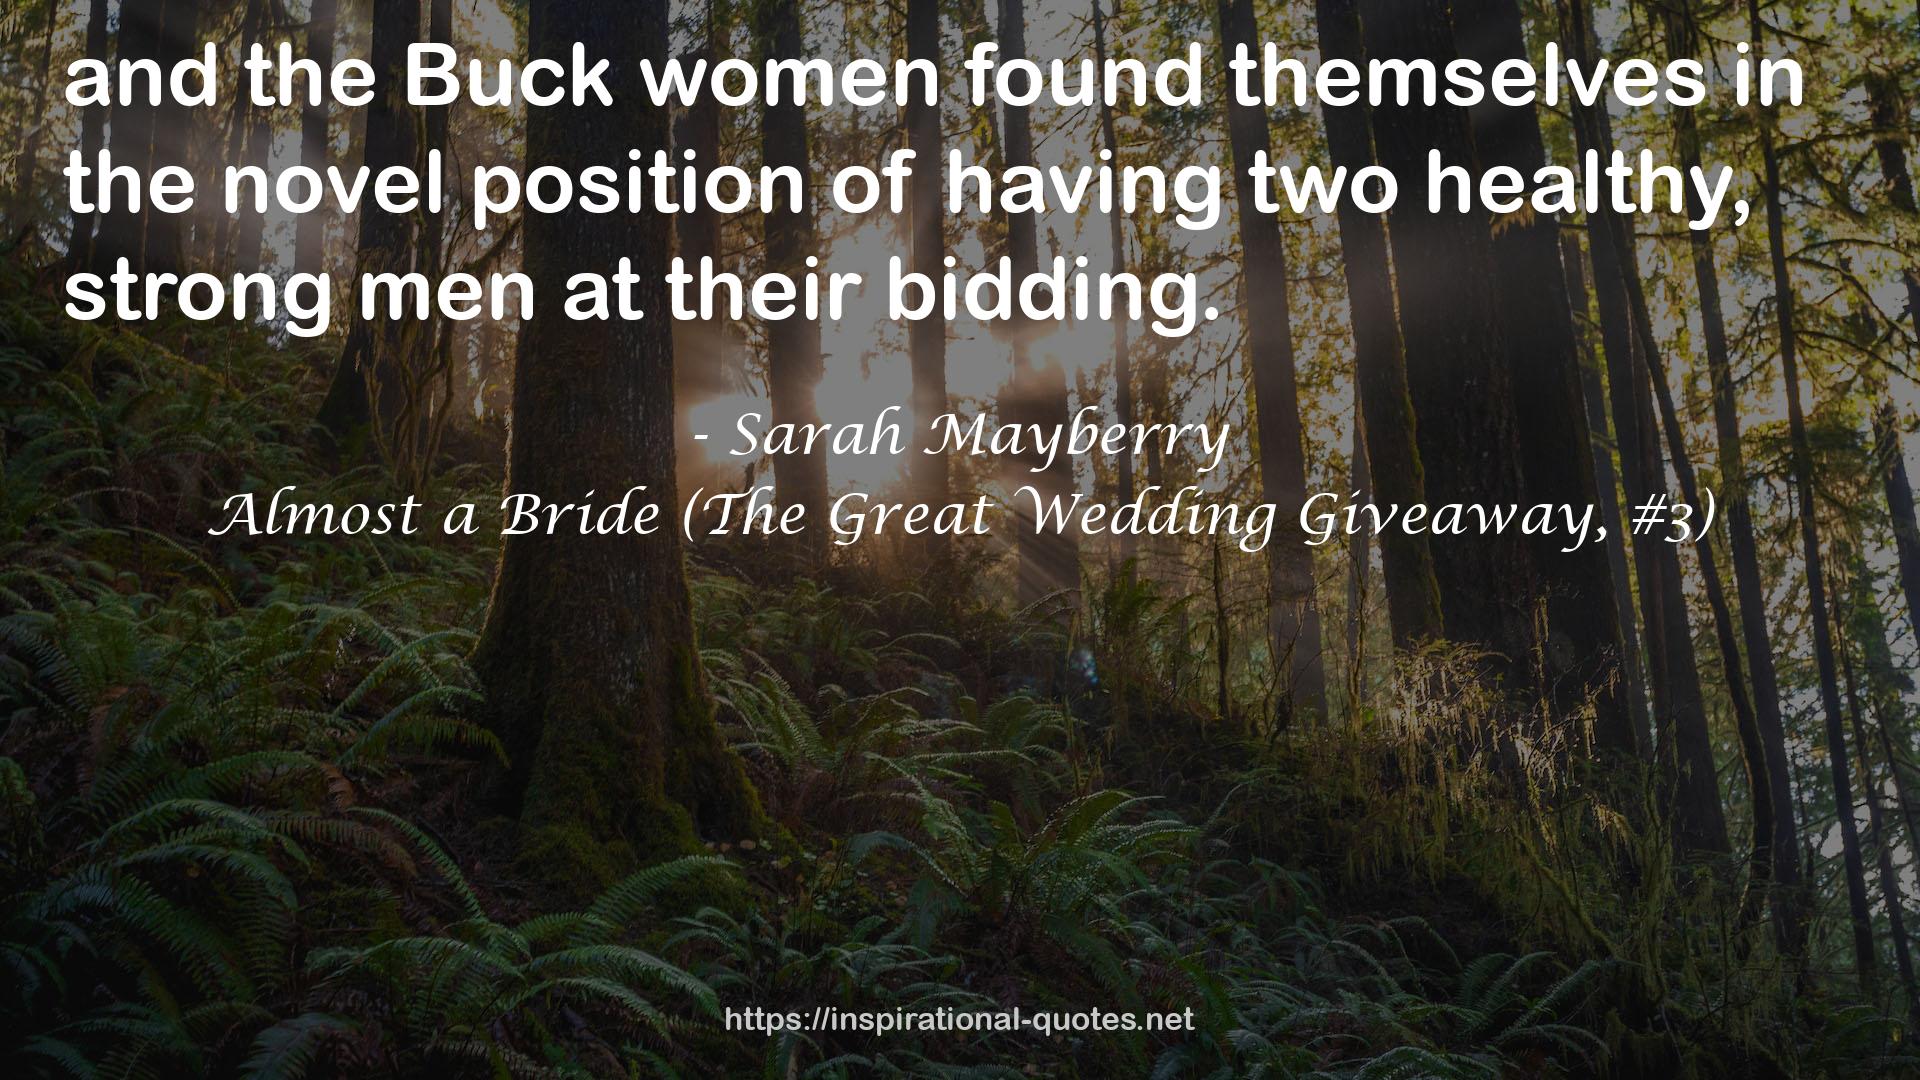 Almost a Bride (The Great Wedding Giveaway, #3) QUOTES